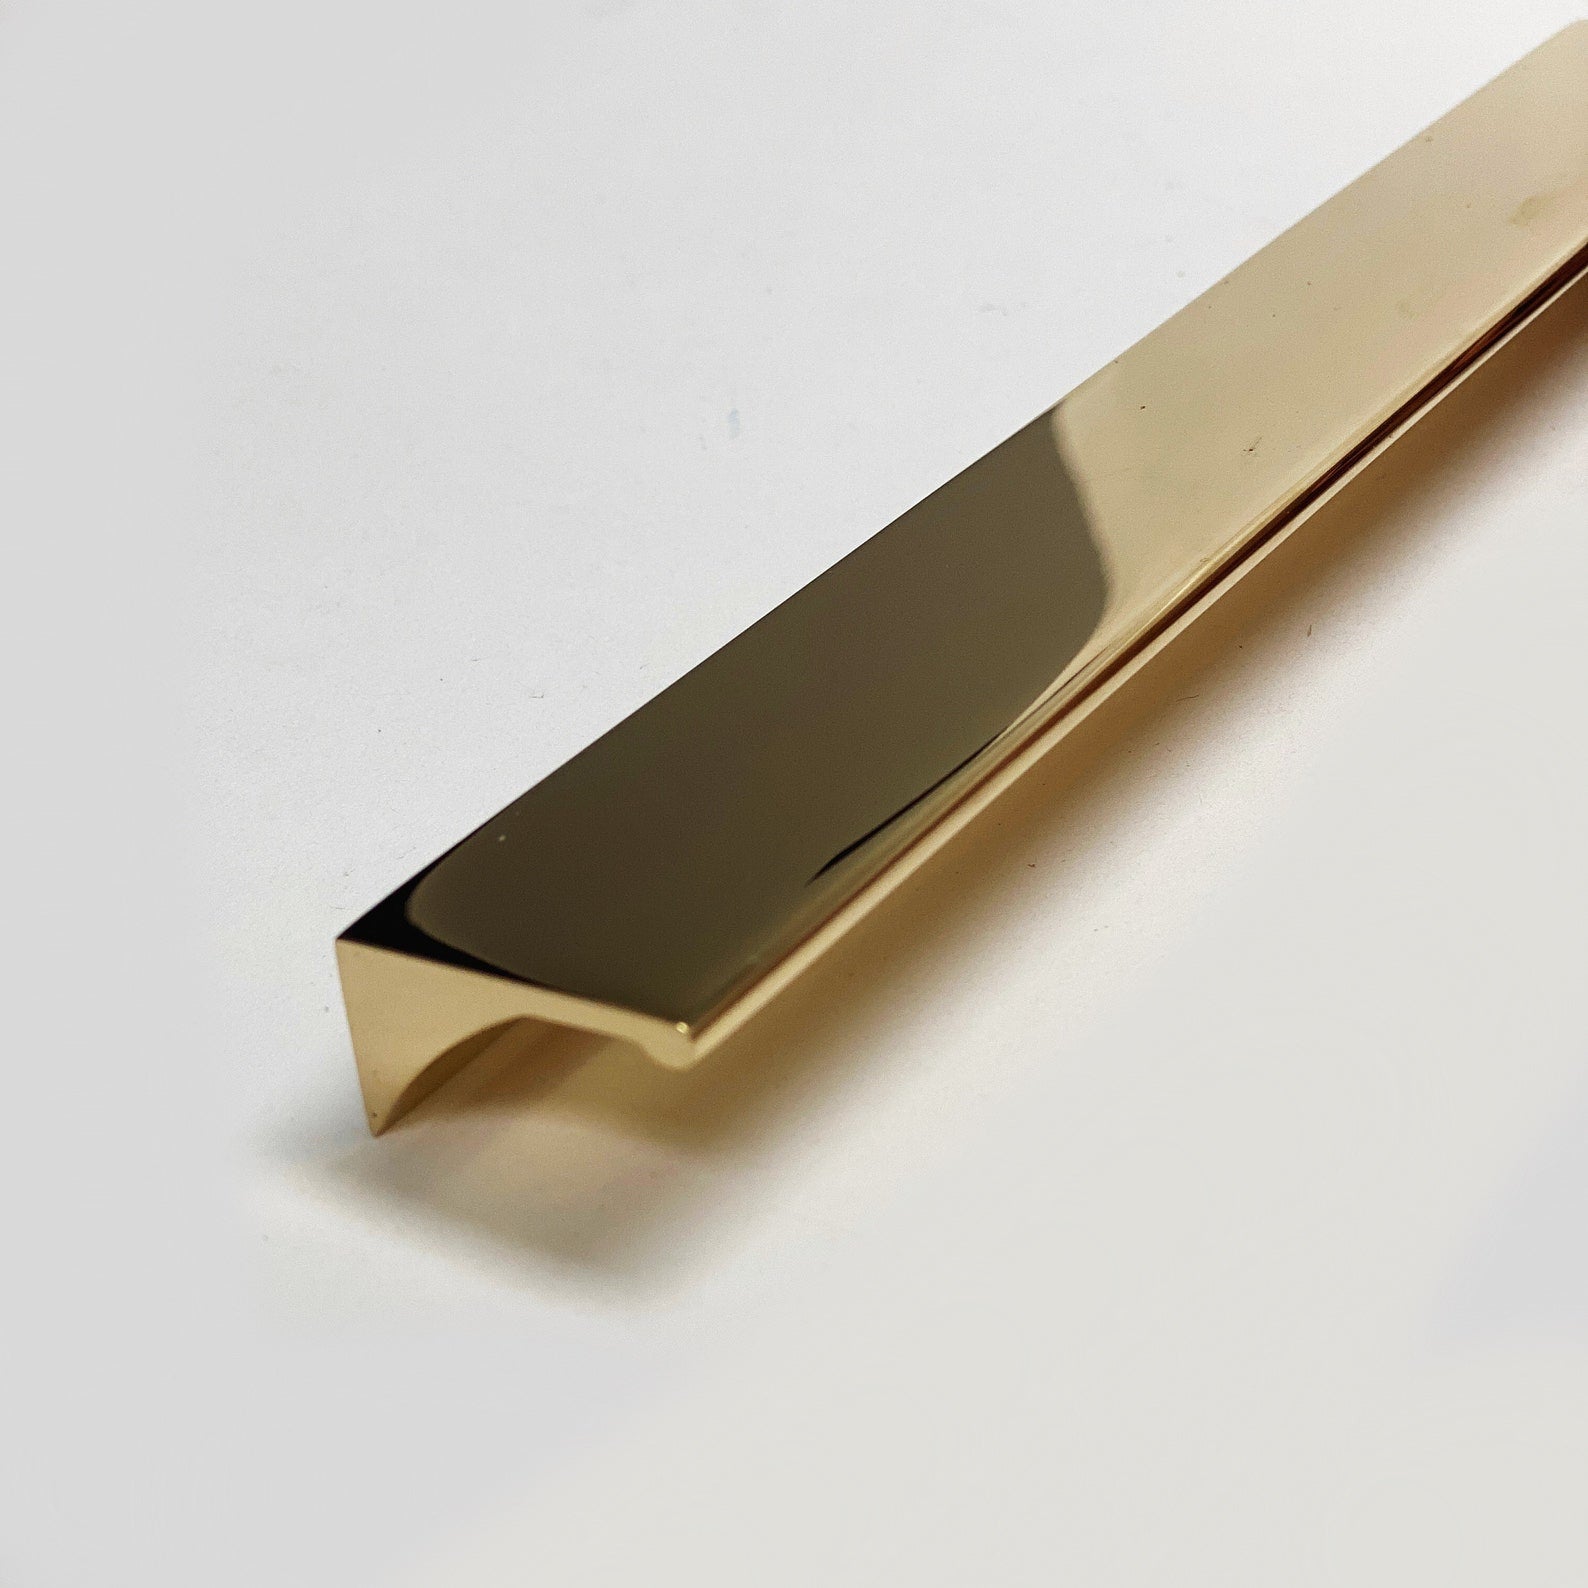 Polished Unlacquered Brass "Graham" Tab Drawer Pull